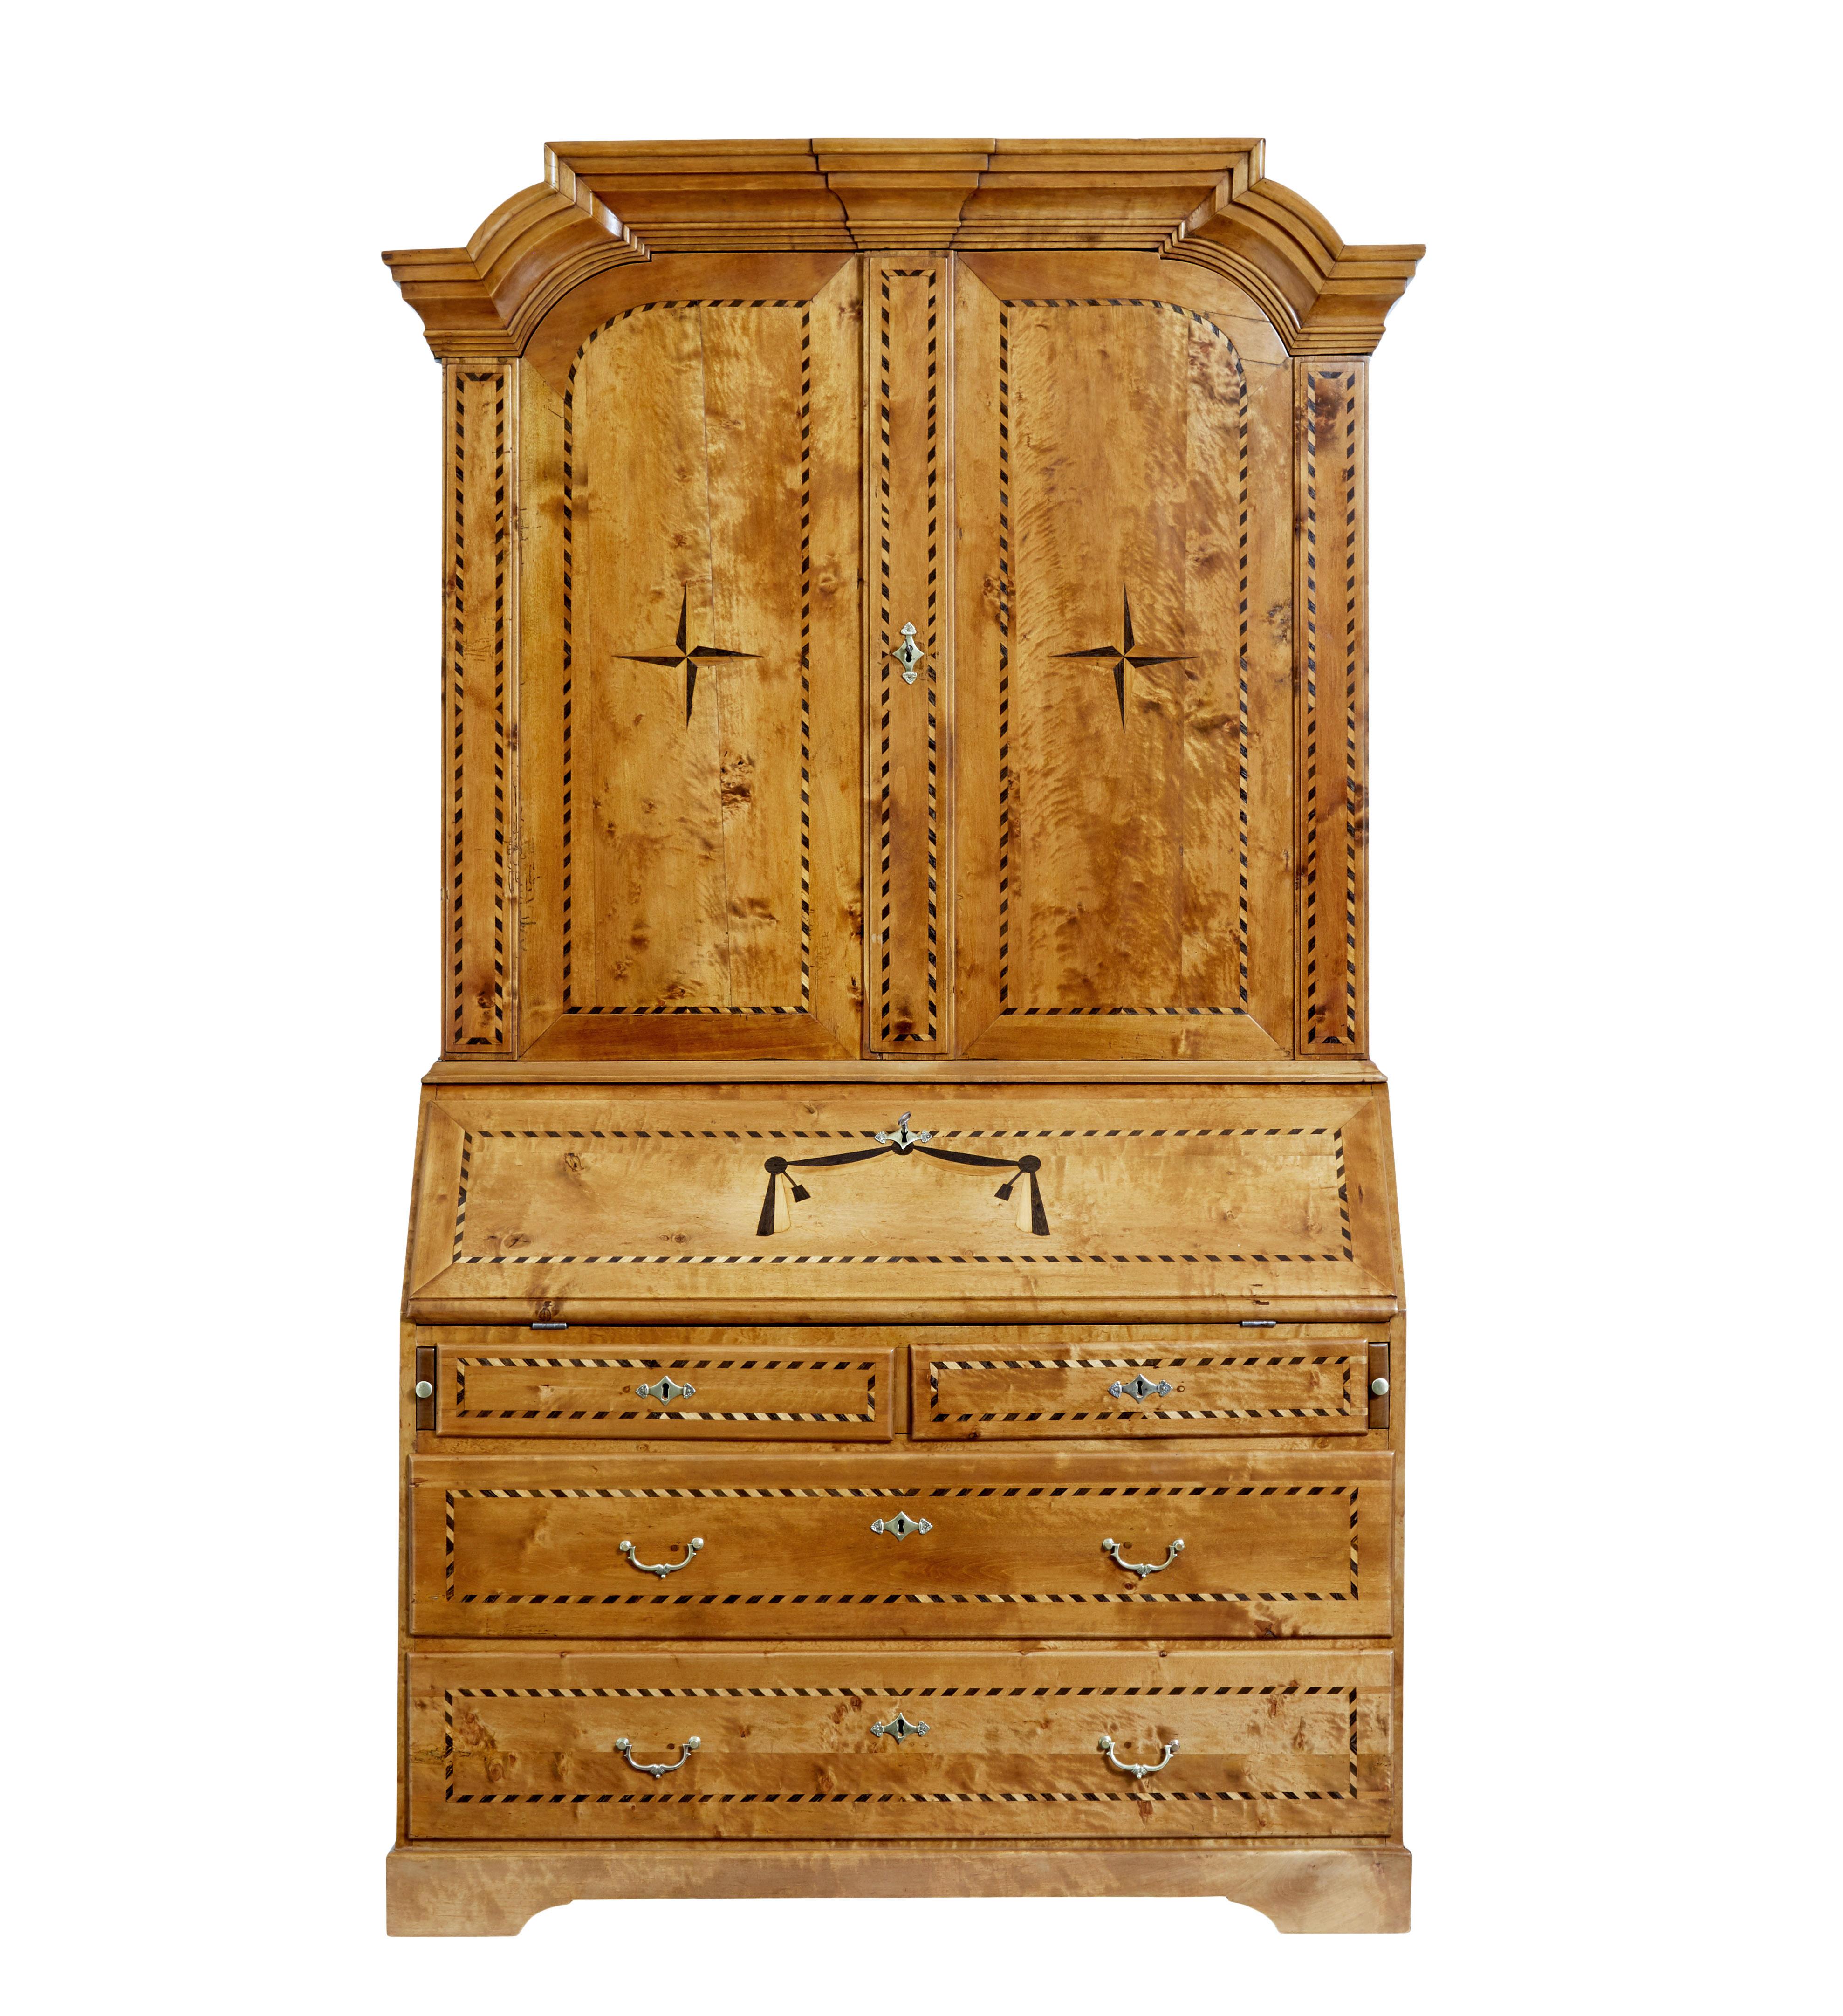 Swedish 19th century birch inlaid bureau bookcase circa 1870.

Good quality swedish bureau bookcase of grand proportions.  Comprising of 2 parts, upper cupboard and the bureau and drawers.

Top section surmounted with a shaped architectural